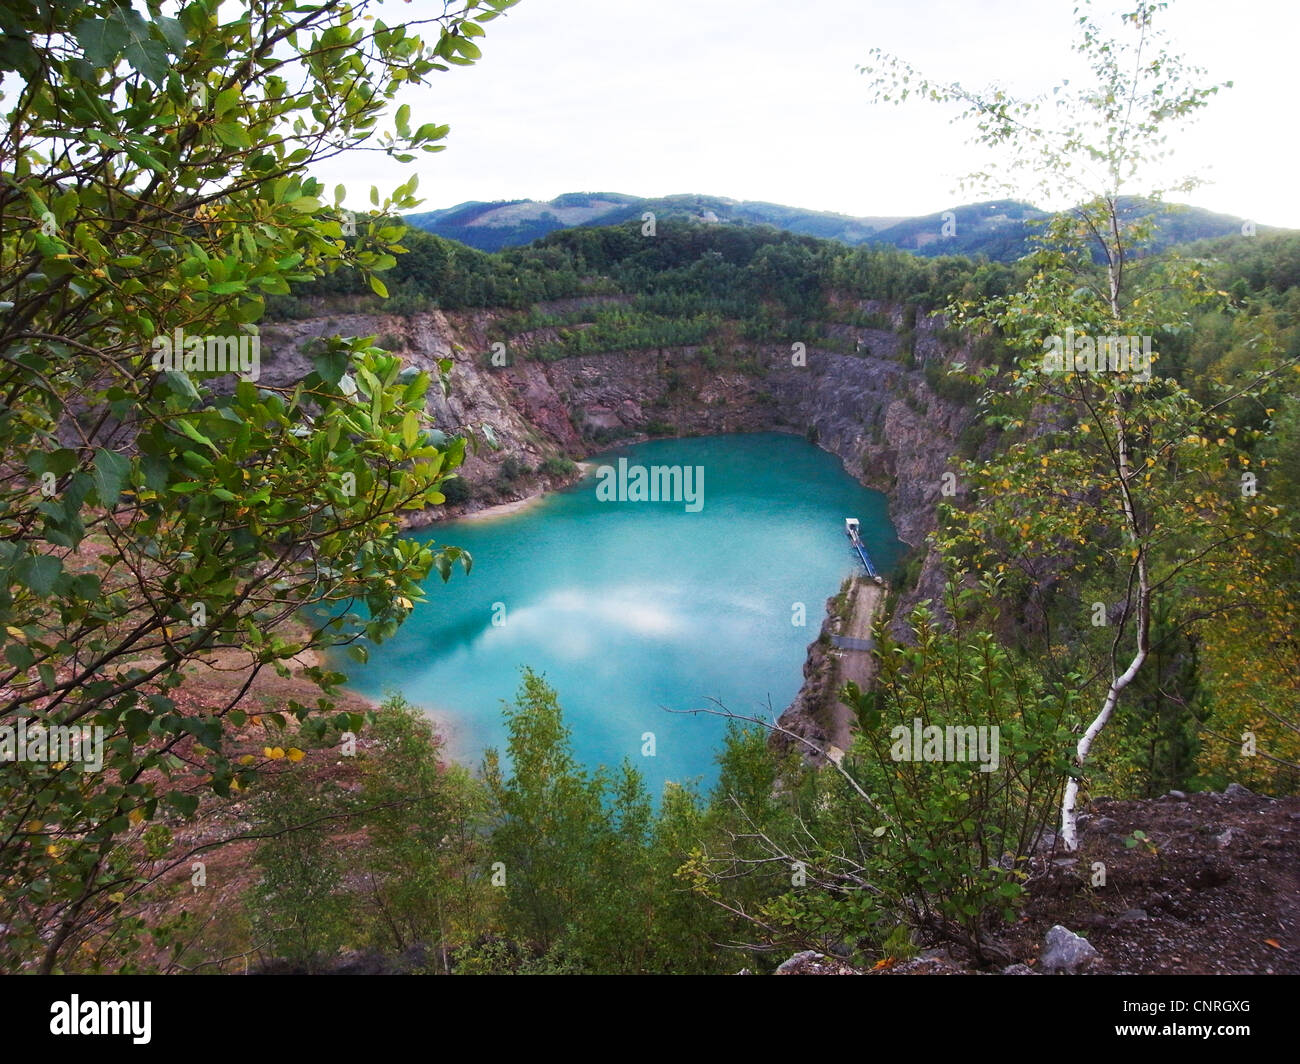 lime stone querry with lake, Germany, North Rhine-Westphalia, Ruhr Area, Hagen Stock Photo